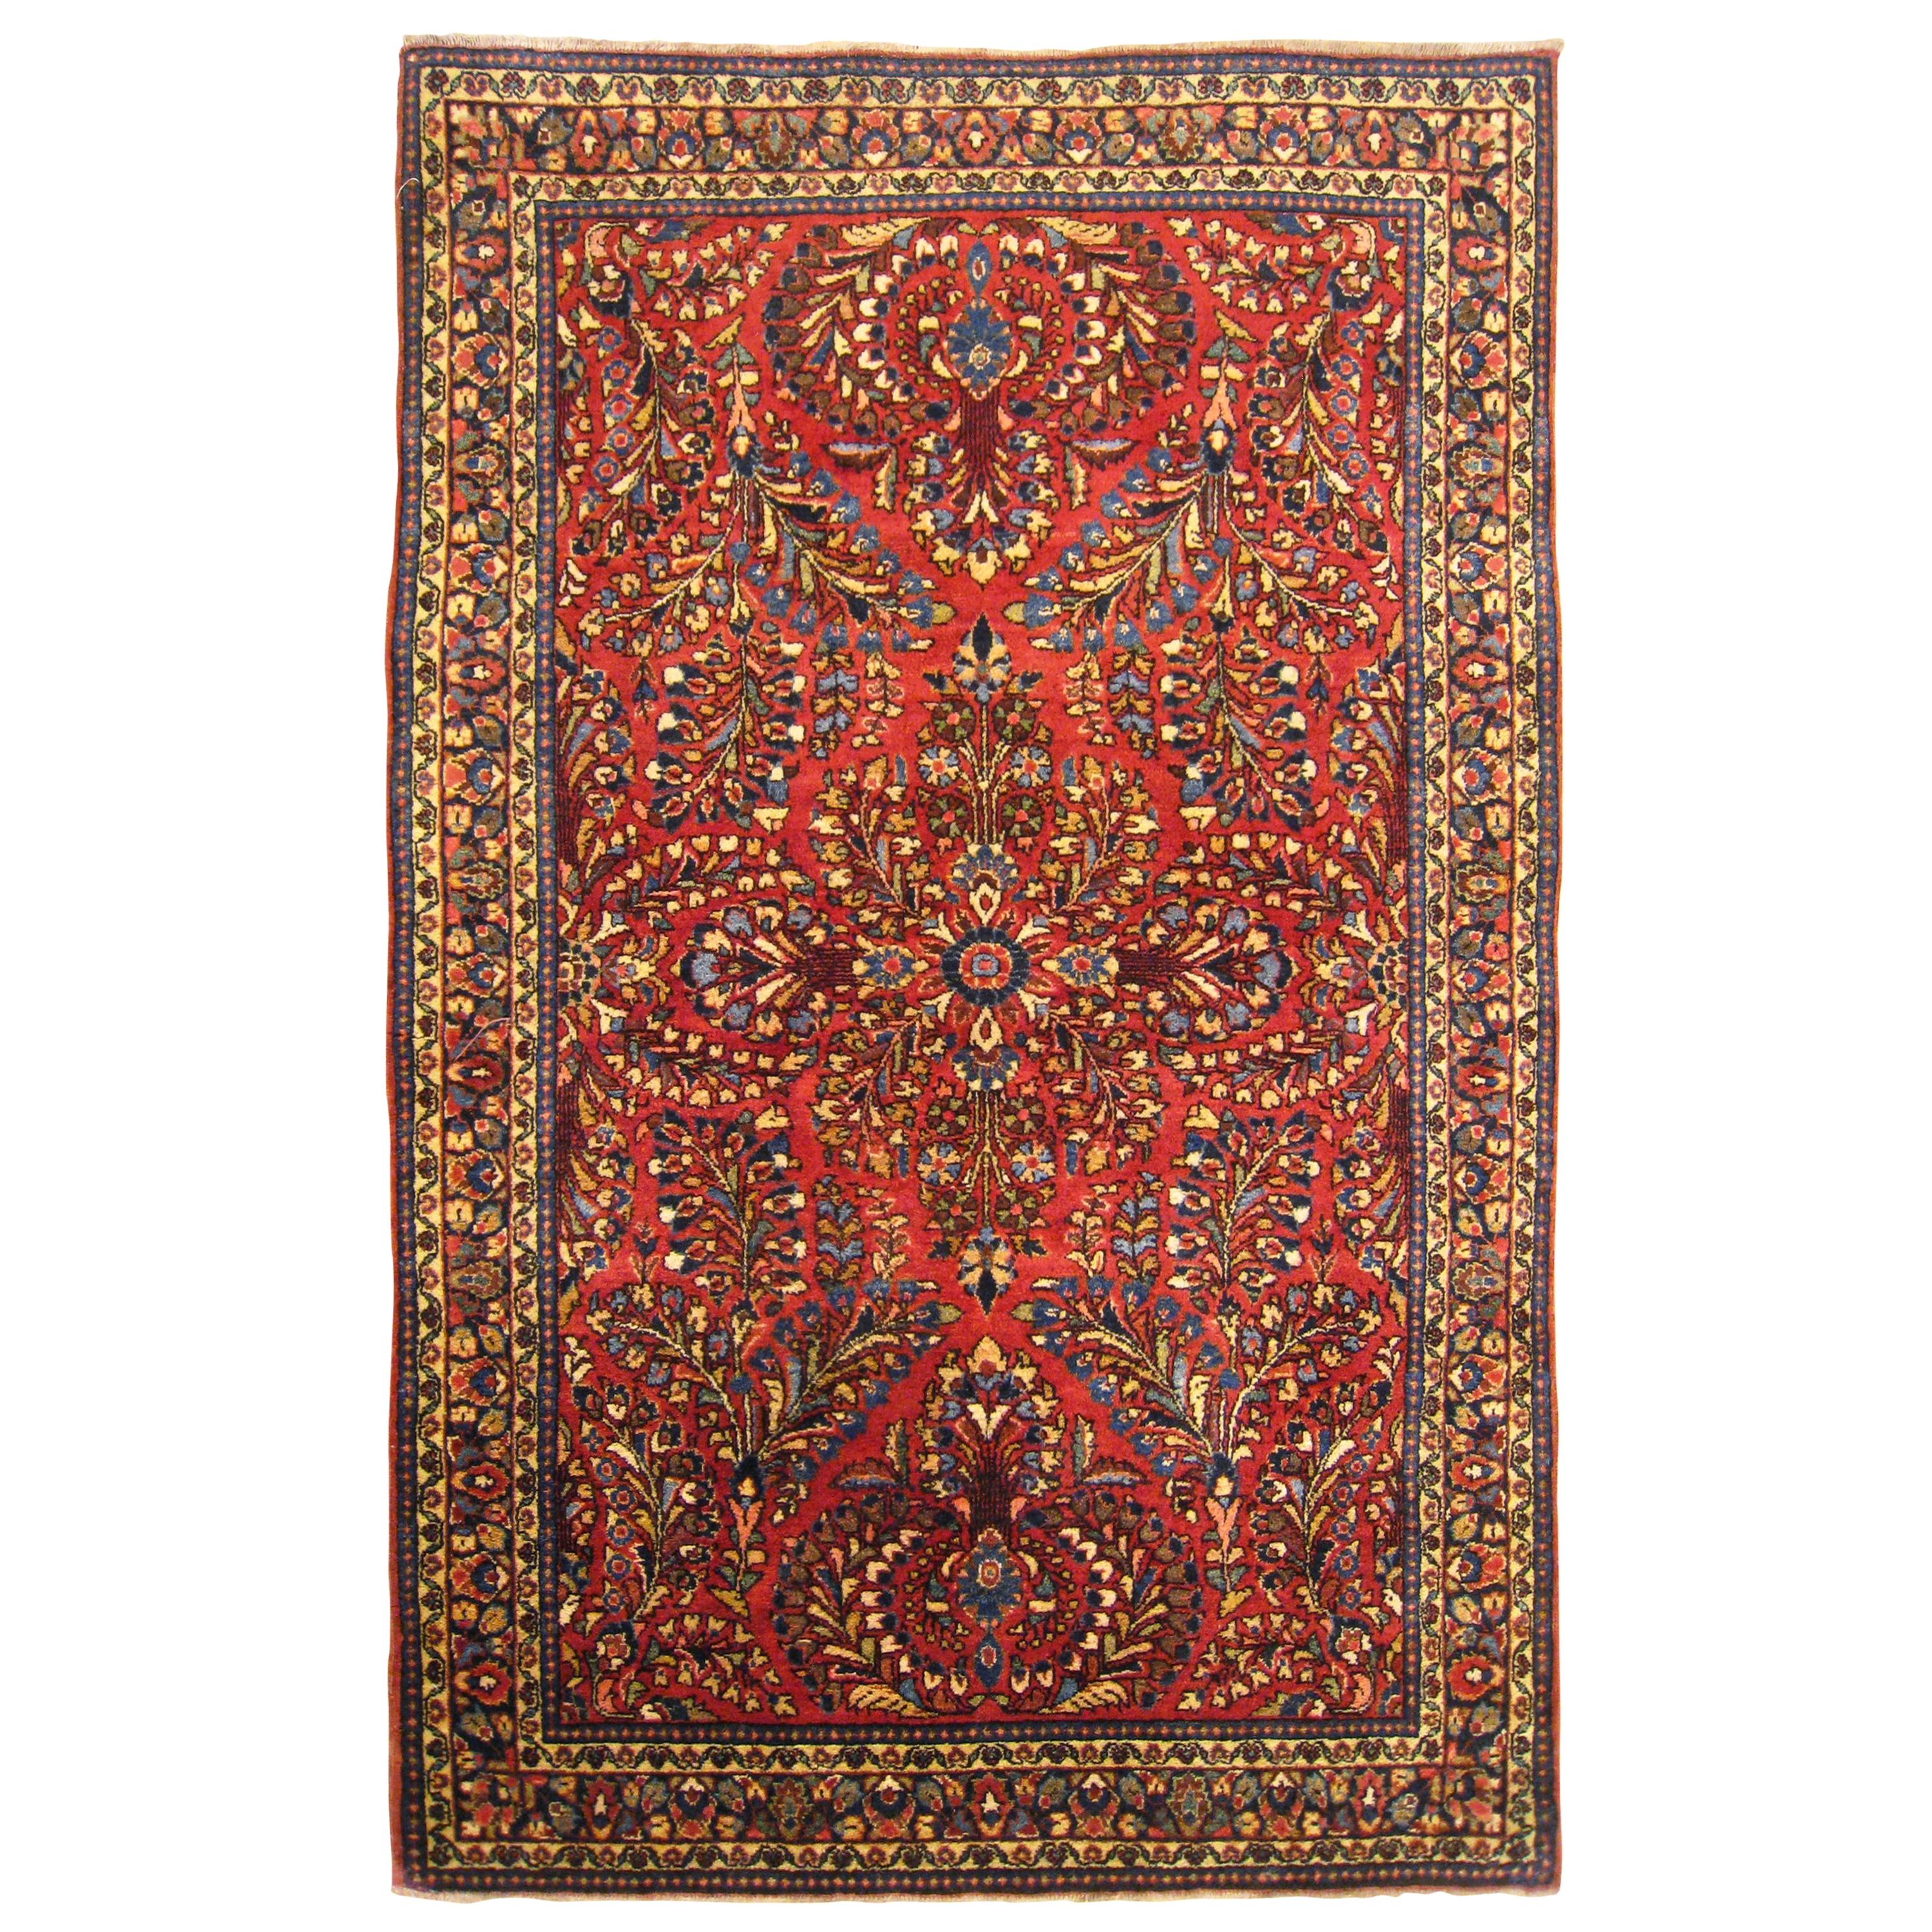 Antique Persian Sarouk Oriental Rug, in Small Size, with Jewel Tones, circa 1920 For Sale